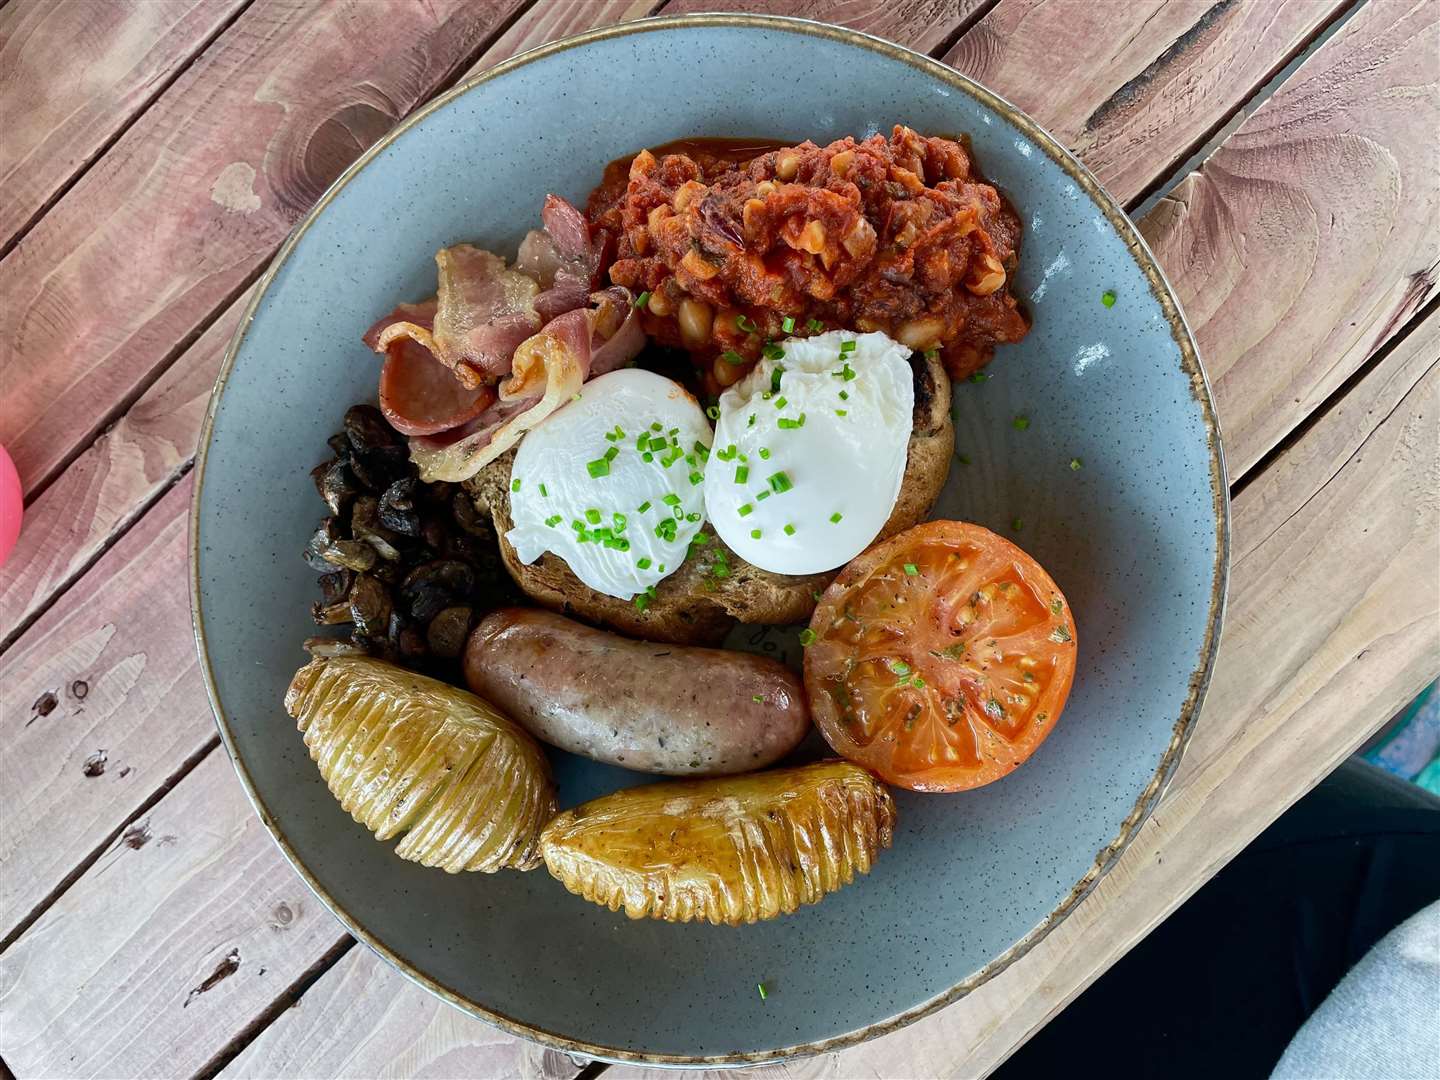 The £11 DPK Breakfast with hasselback hash added for an extra £2